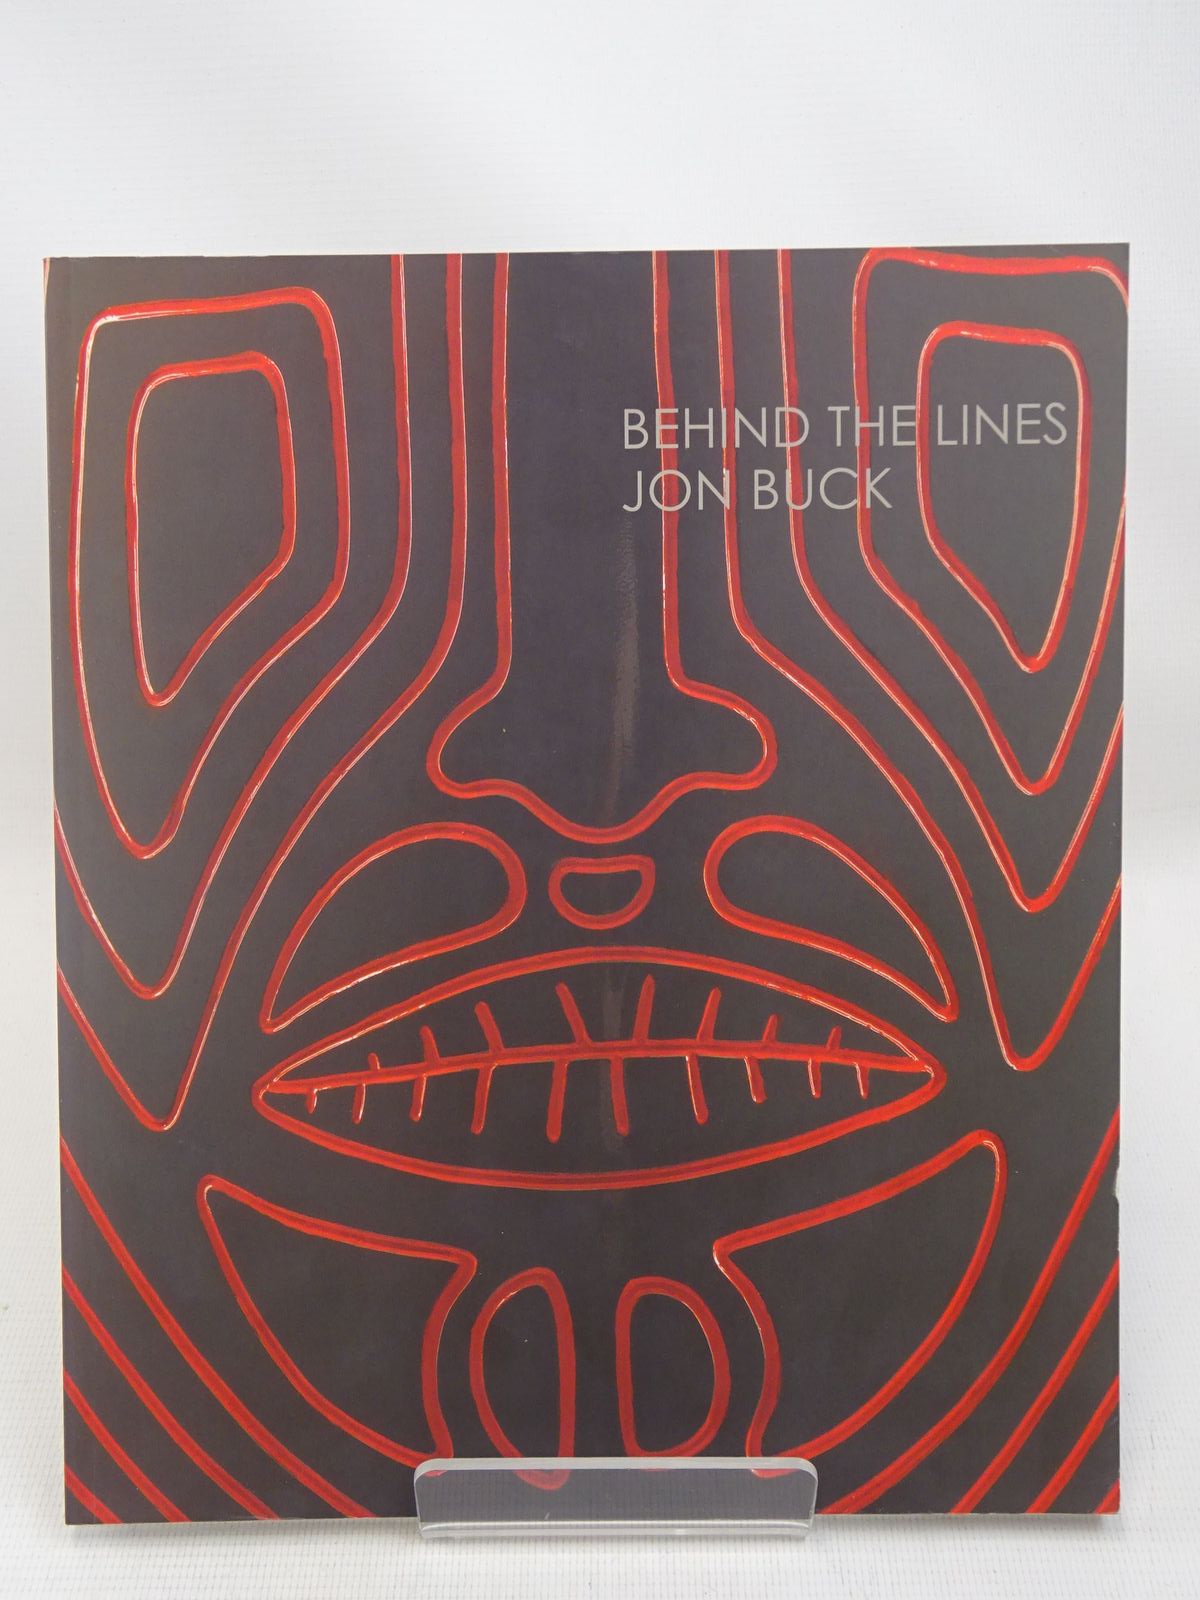 Photo of BEHIND THE LINES: JON BUCK written by Bielecka, Polly illustrated by Buck, Jon published by Pangolin London (STOCK CODE: 1816463)  for sale by Stella & Rose's Books